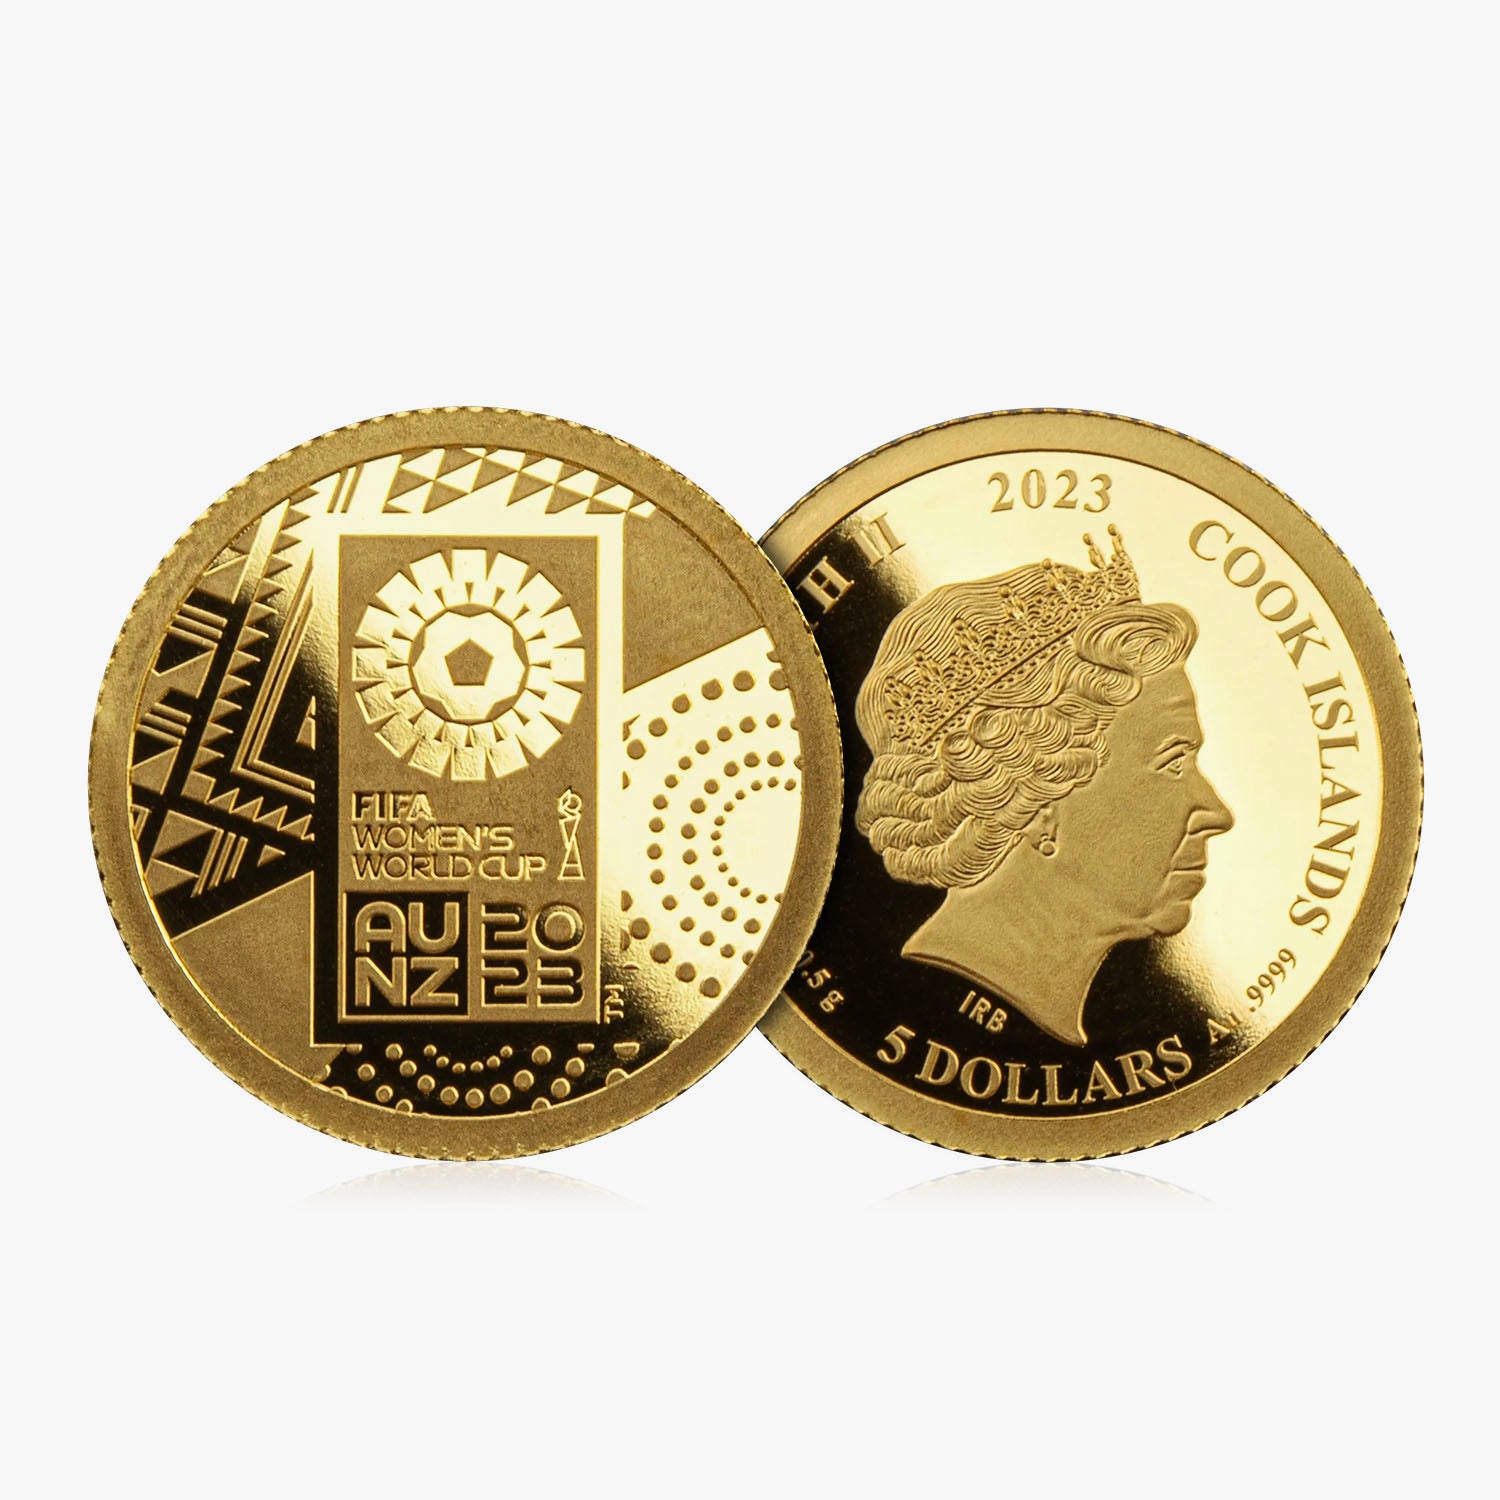 FIFA Women's World Cup 2023 Gold Coin